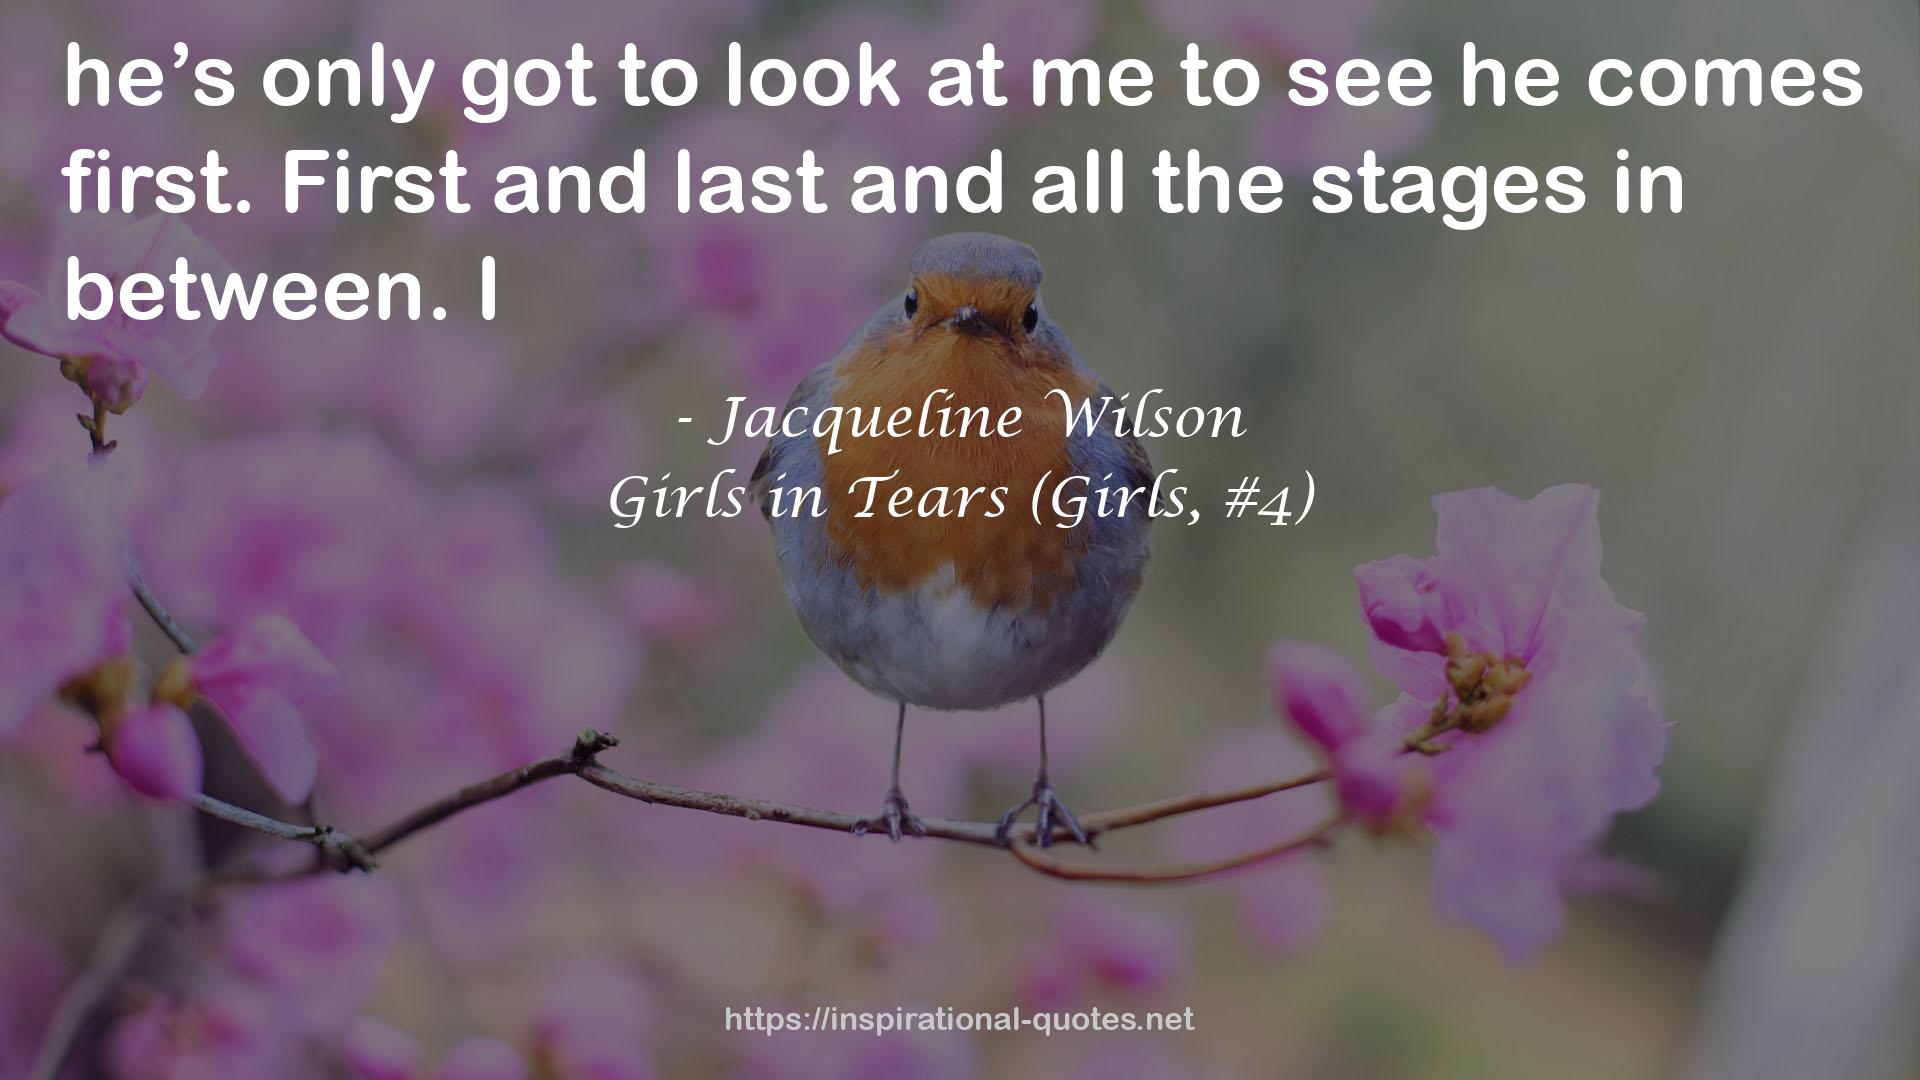 Girls in Tears (Girls, #4) QUOTES